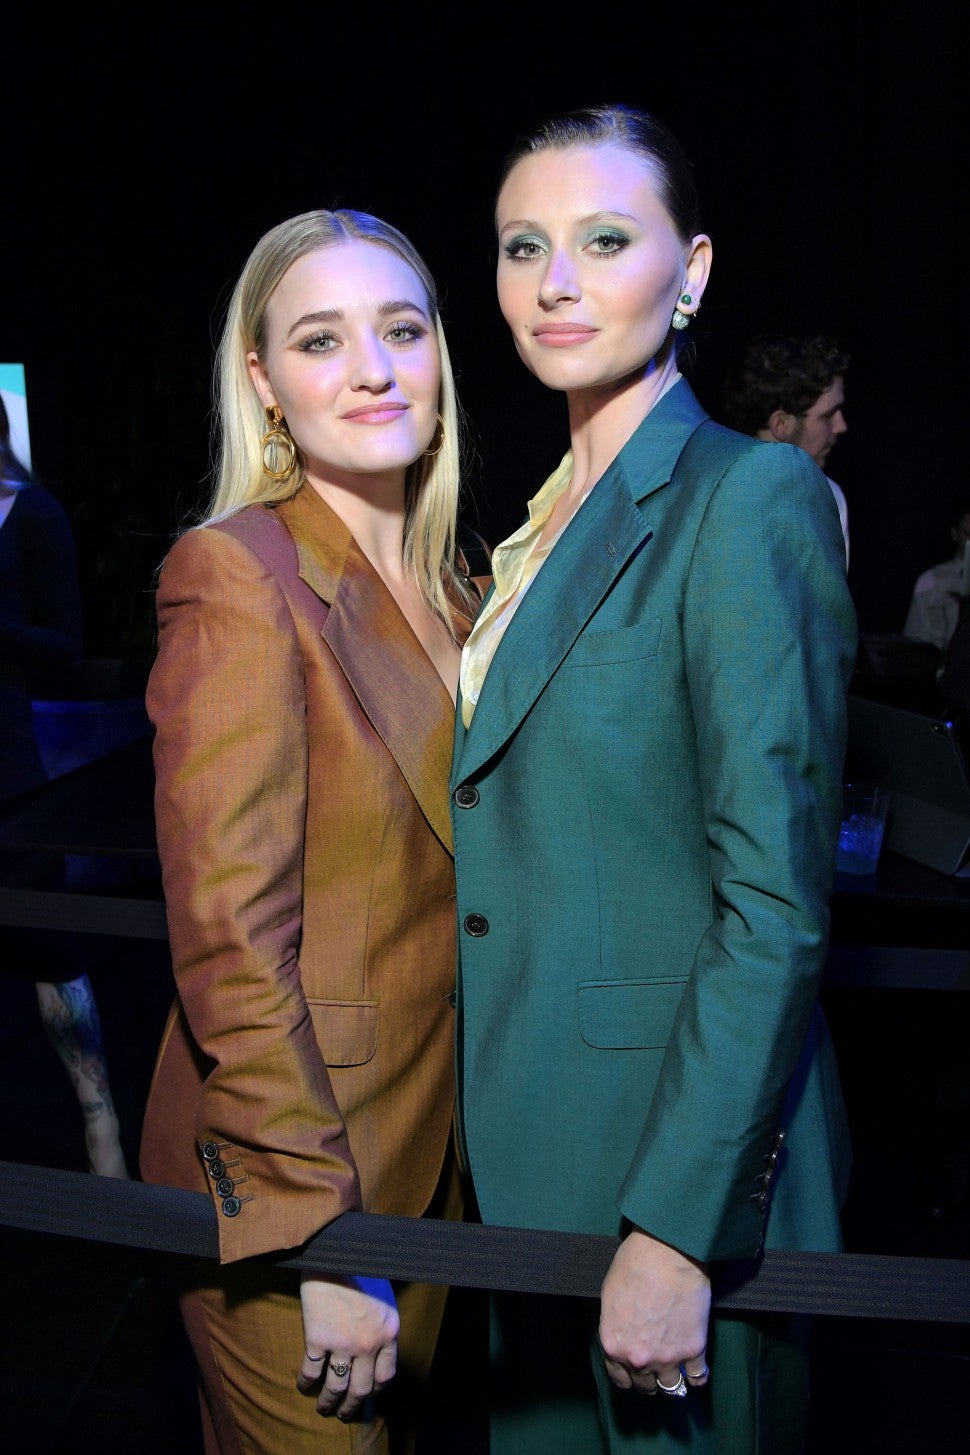 AJ Michalka and Aly Michalka at Spotify's "Best New Artist" Party in january 2020